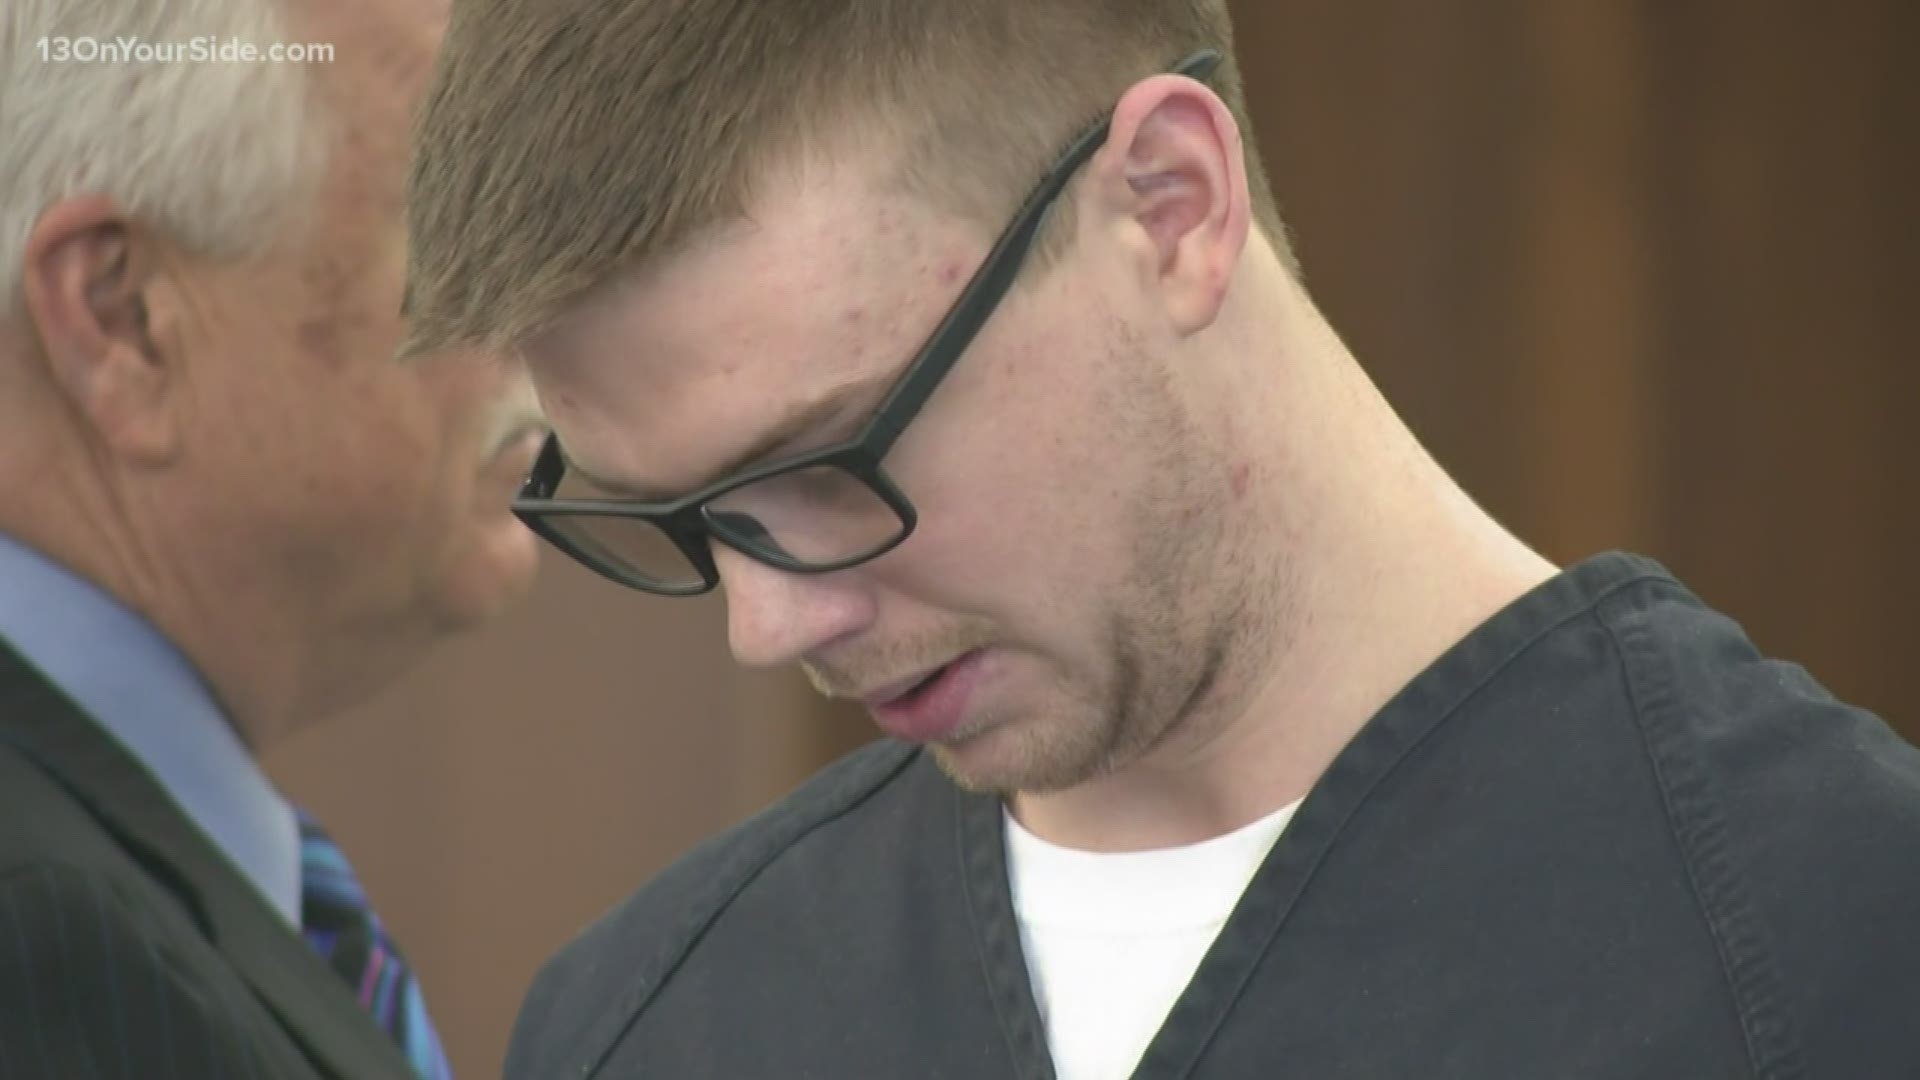 Cody Loomis was sentenced to 12 years in prison after pleading guilty to two counts of operating while intoxicated causing death.